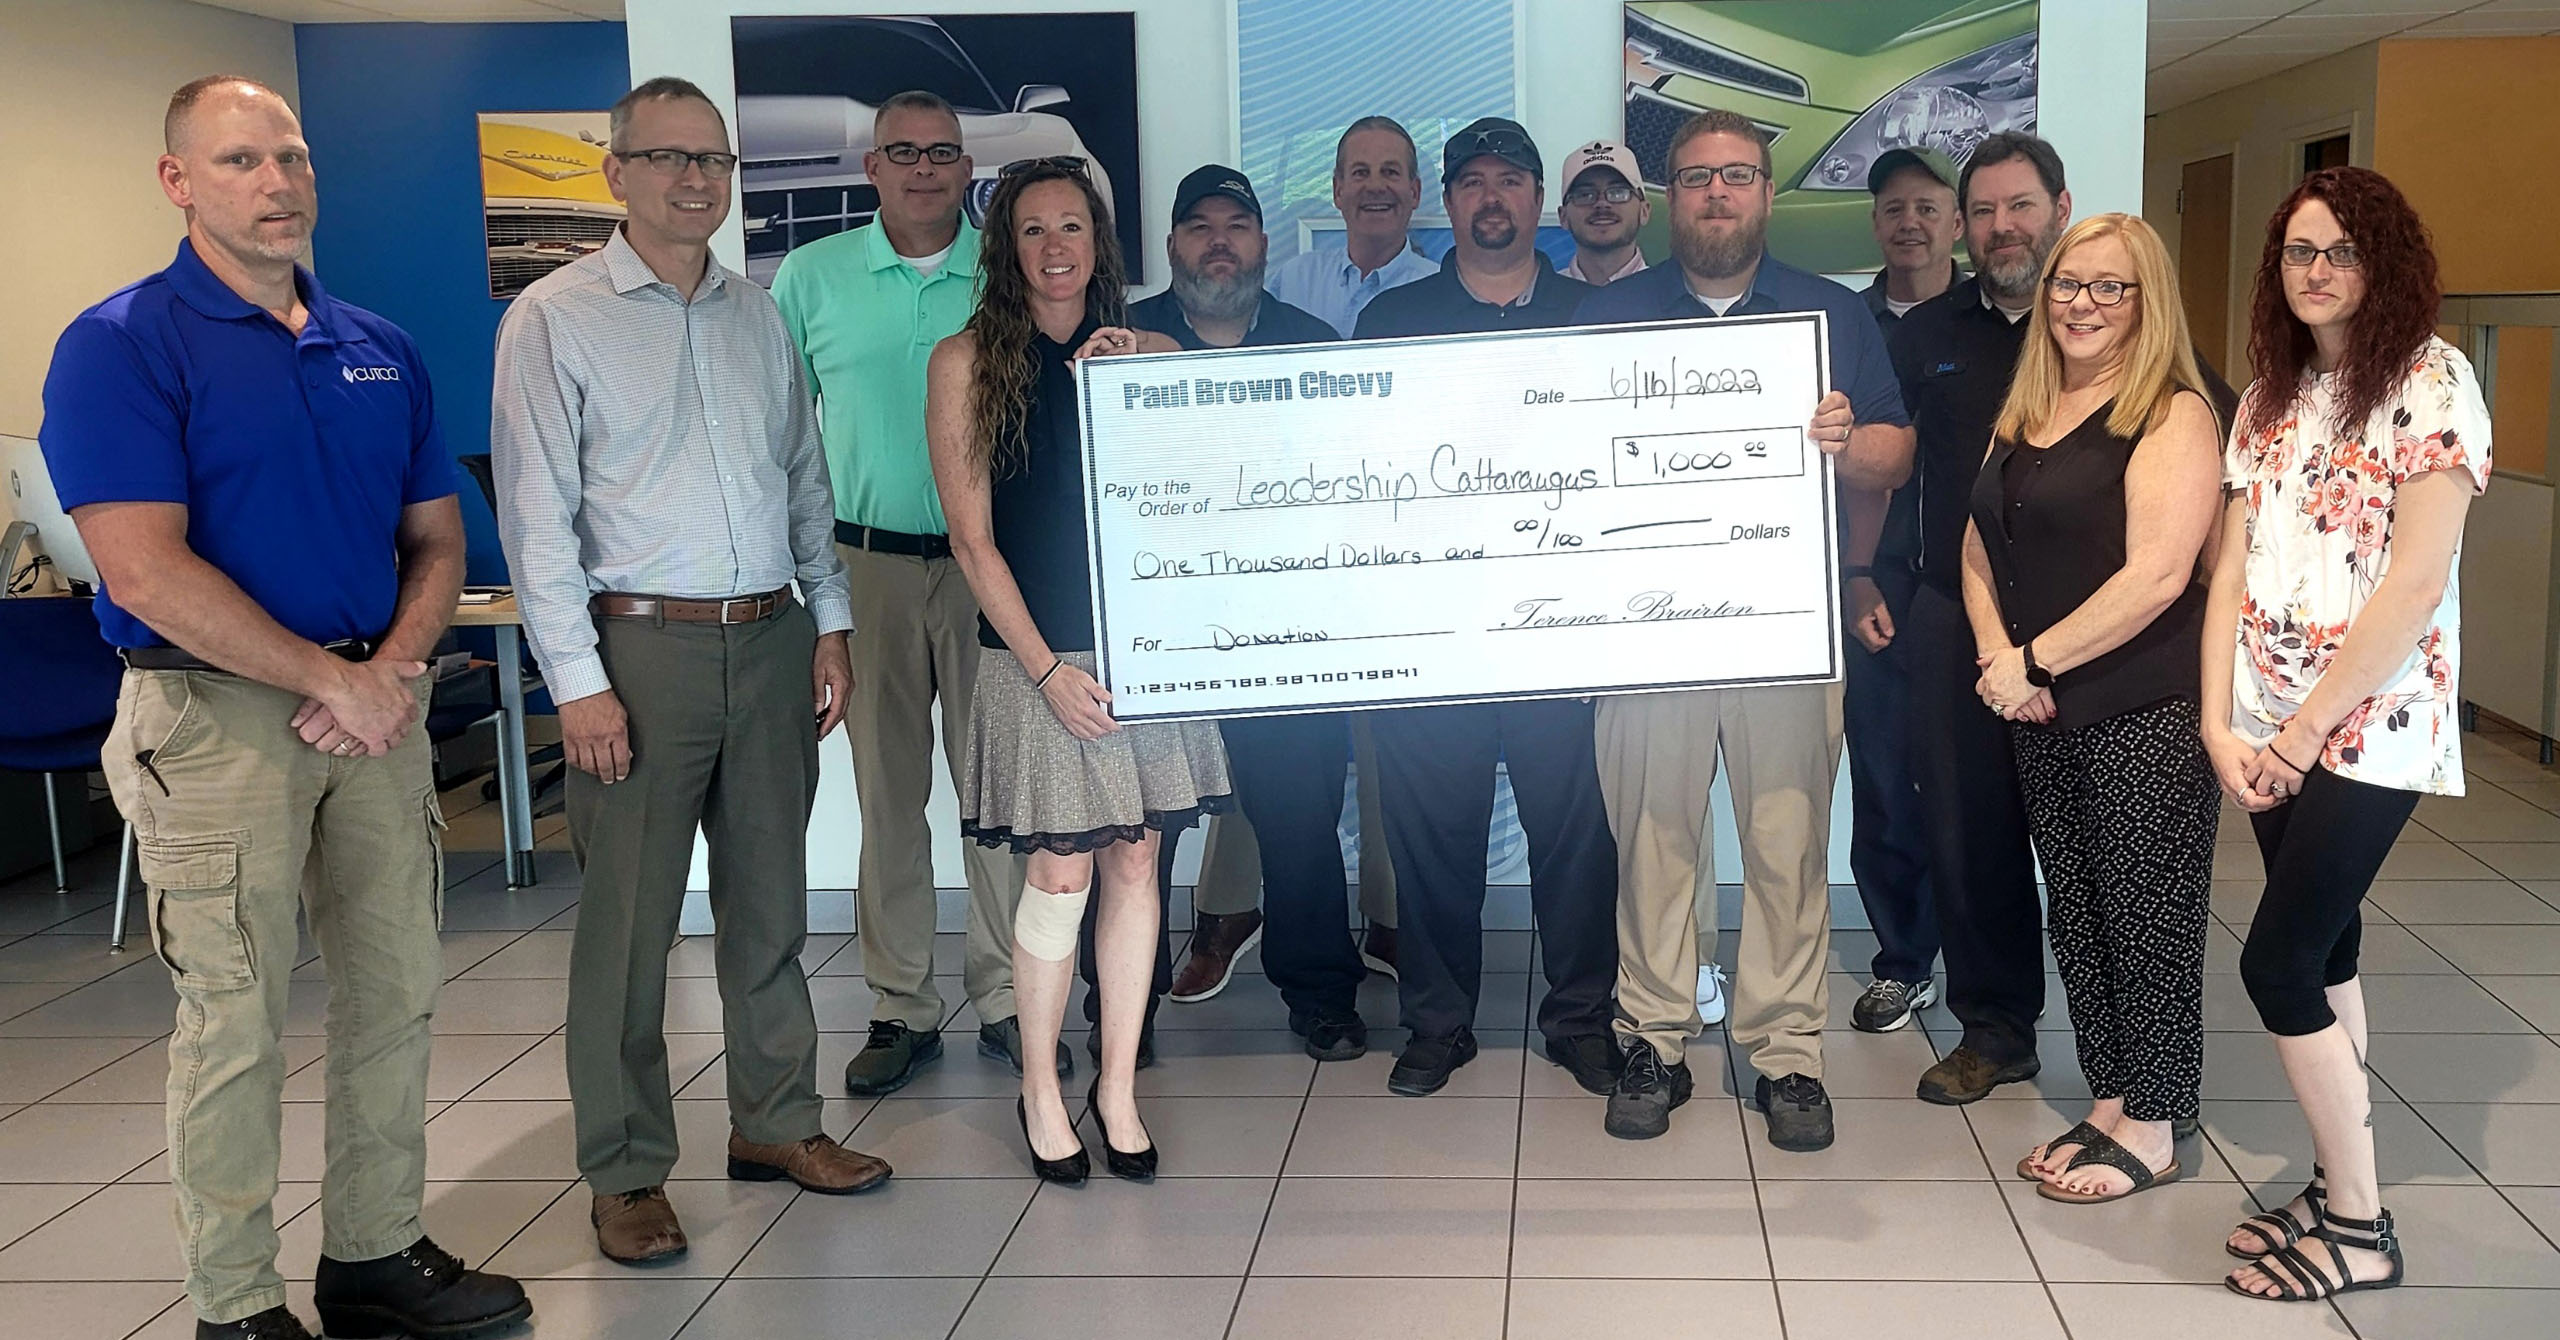 Leadership Cattarugus' Leadership team with Paul Brown Chevy staff accepting a donation of $1,000 to the Leadership Cattaraugus Scholarship Fund.